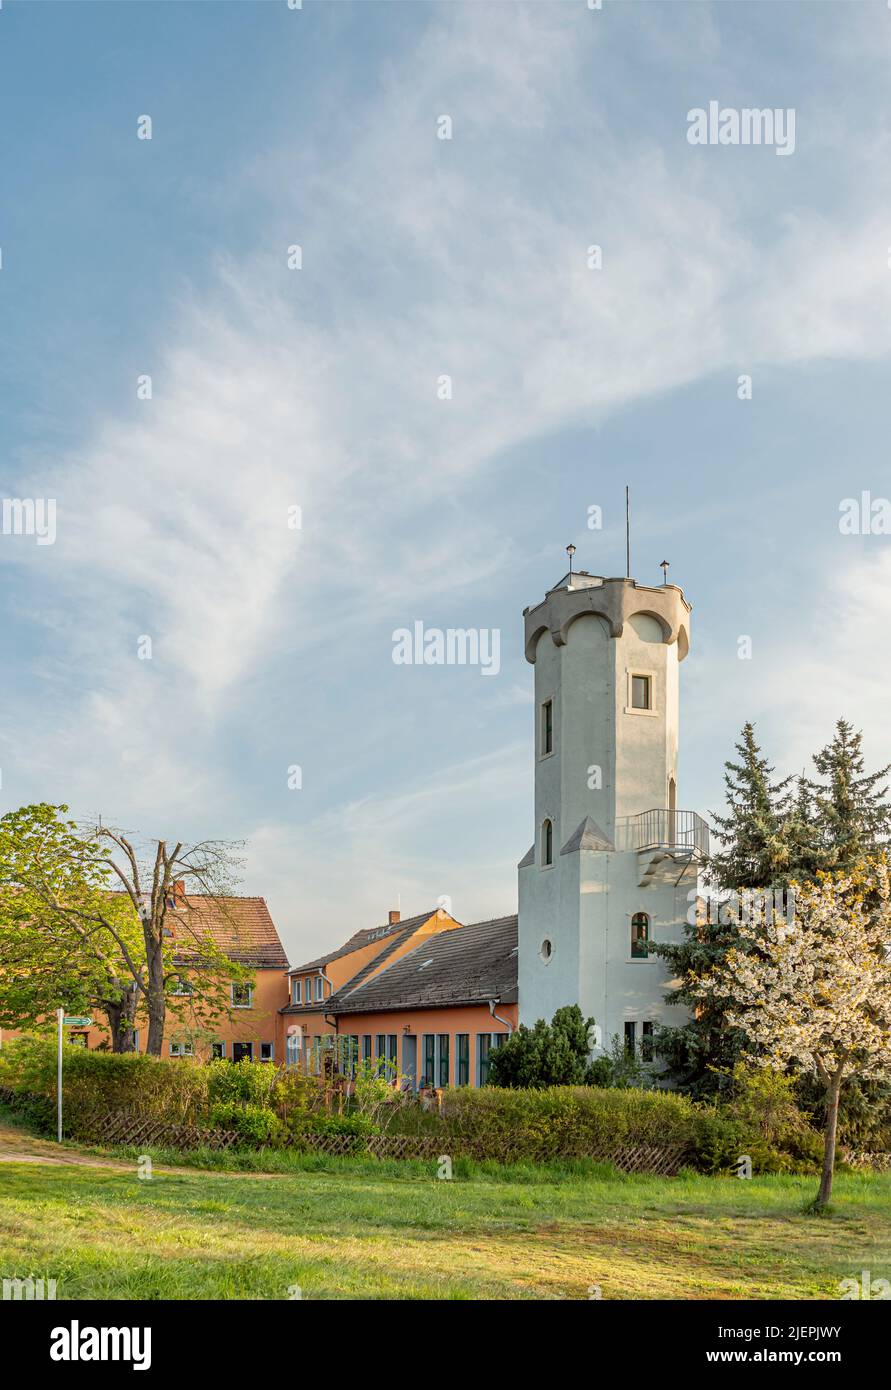 Boselturm Tower on the Boselspitze at the Spaargebirge in Saxony, Germany Stock Photo